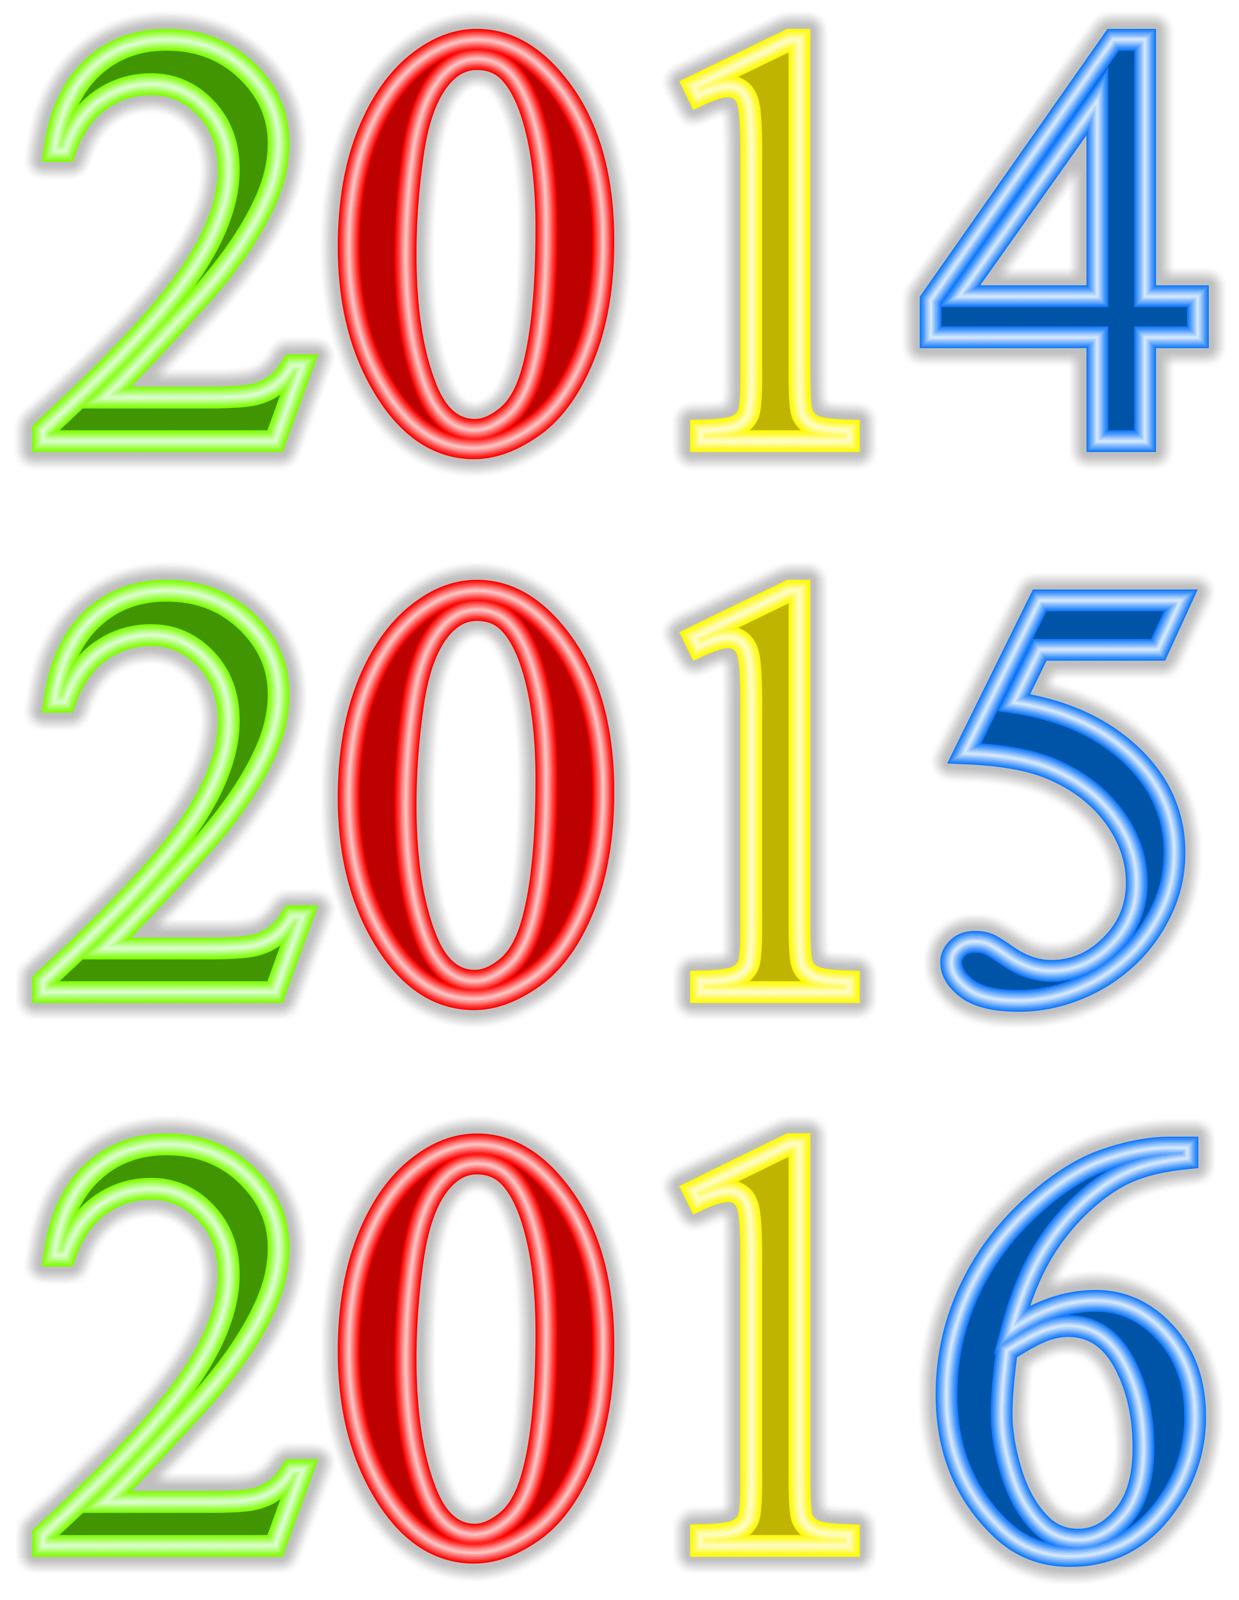 new year 2015 clipart - photo #25